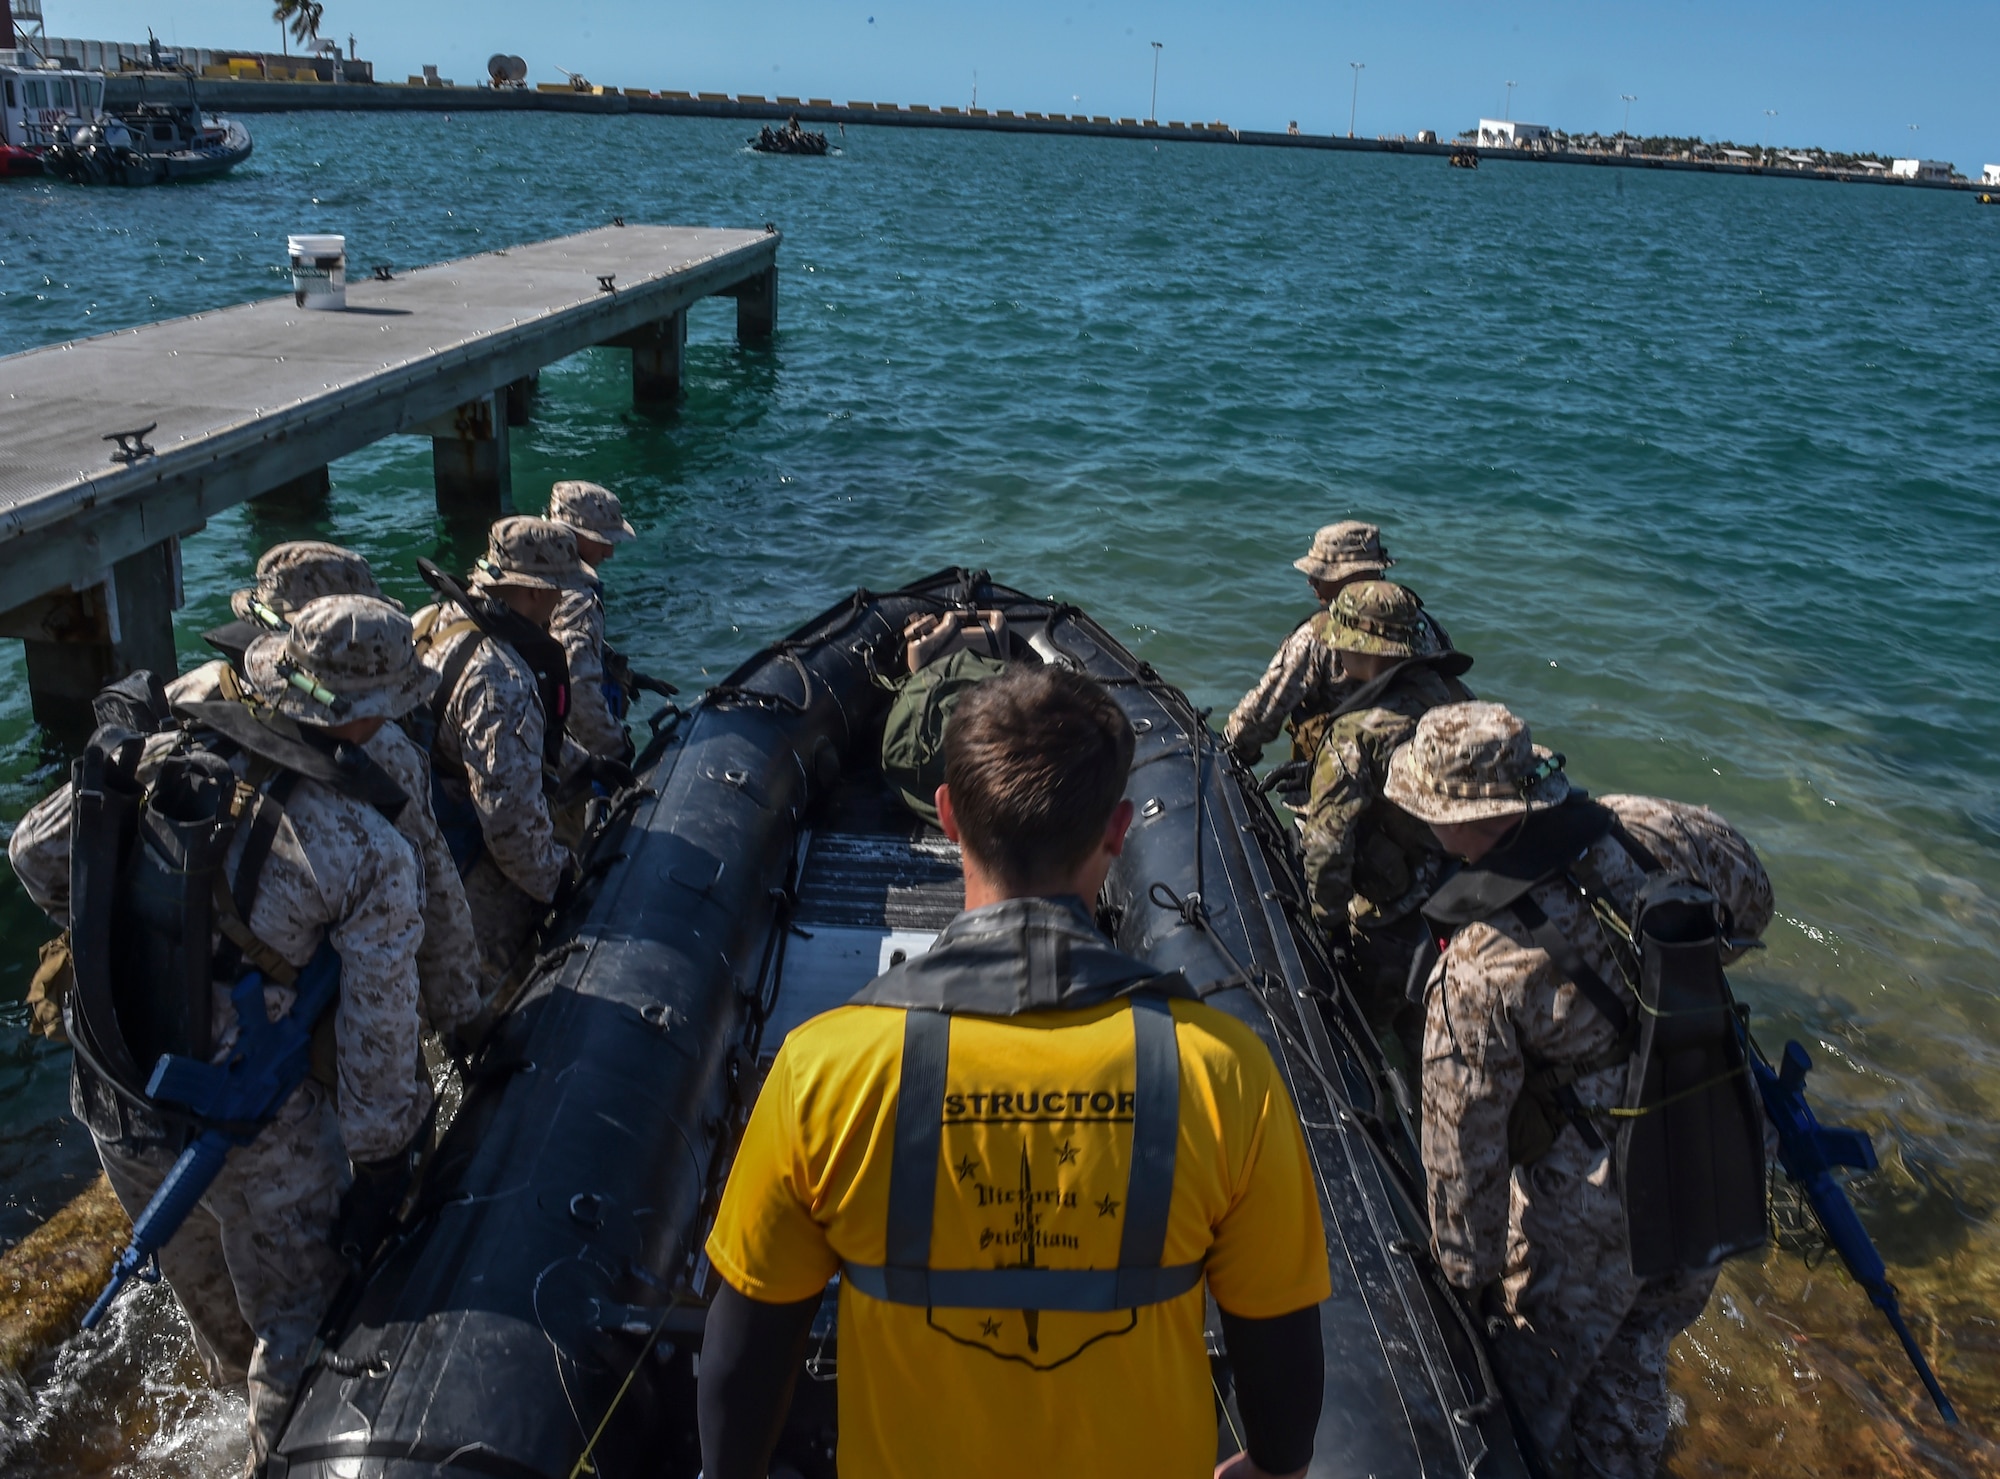 U.S. Marines and Airmen carry a Zodiac boat to the water during Marine Special Operations School’s Individual Training Course, March 22, 2017, at Key West, Fla. For the first time, U.S. Air Force Special Tactics Airmen spent three months in Marine Special Operations Command’s Marine Raider training pipeline, representing efforts to build joint mindsets across special operations forces.  (U.S. Air Force photo by Senior Airman Ryan Conroy)